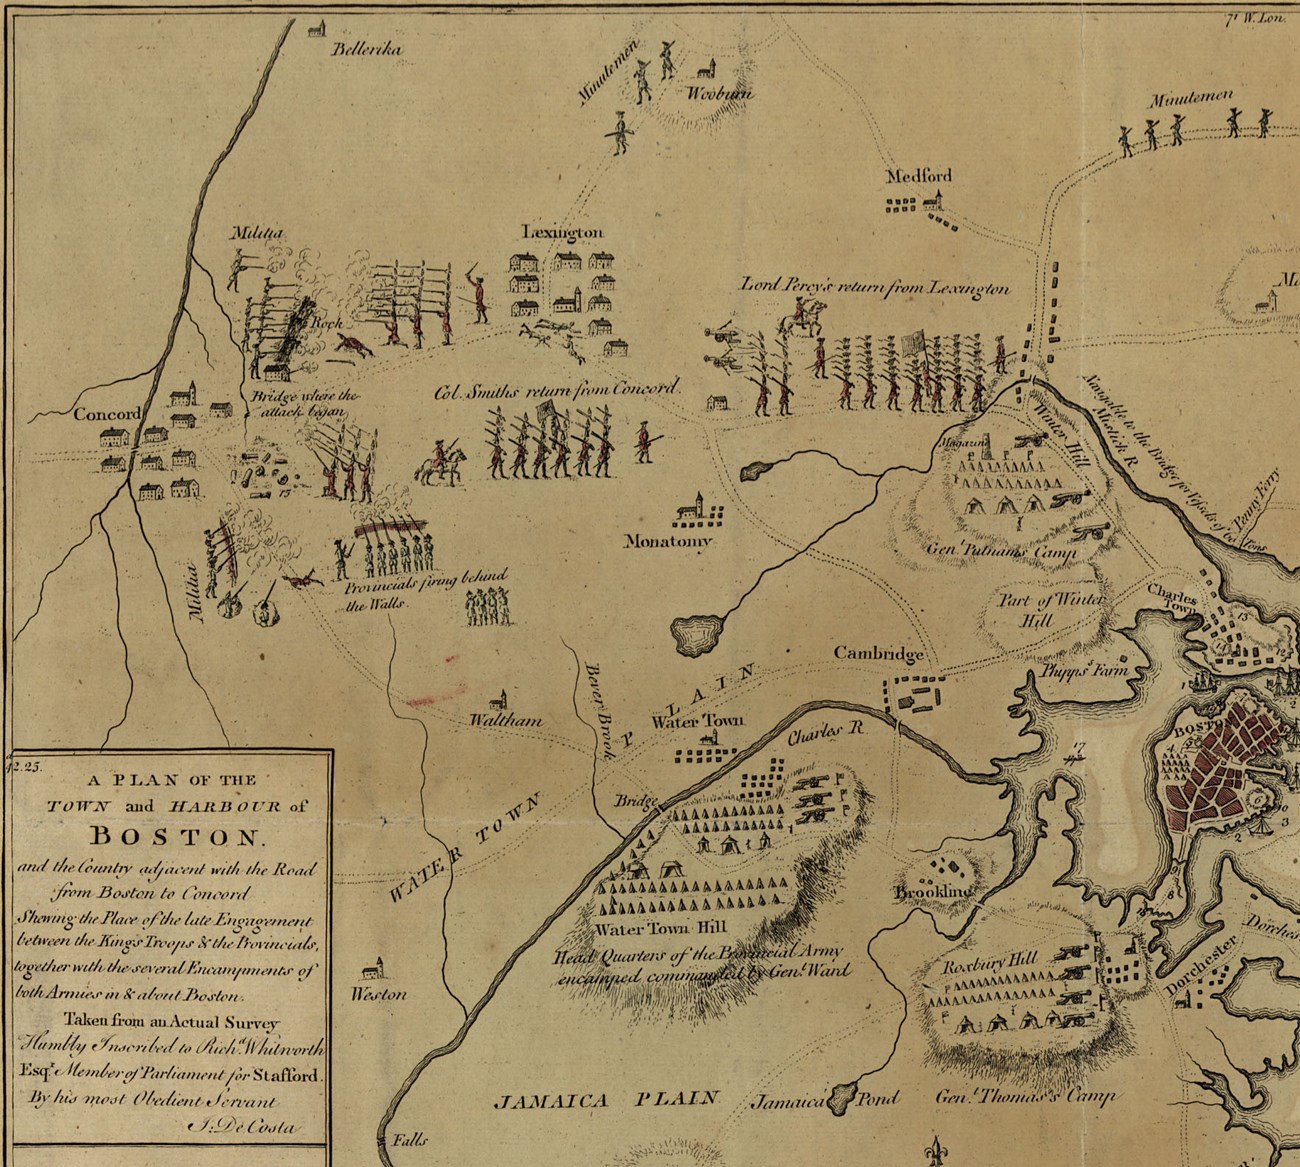 Old map of Boston and Concord.